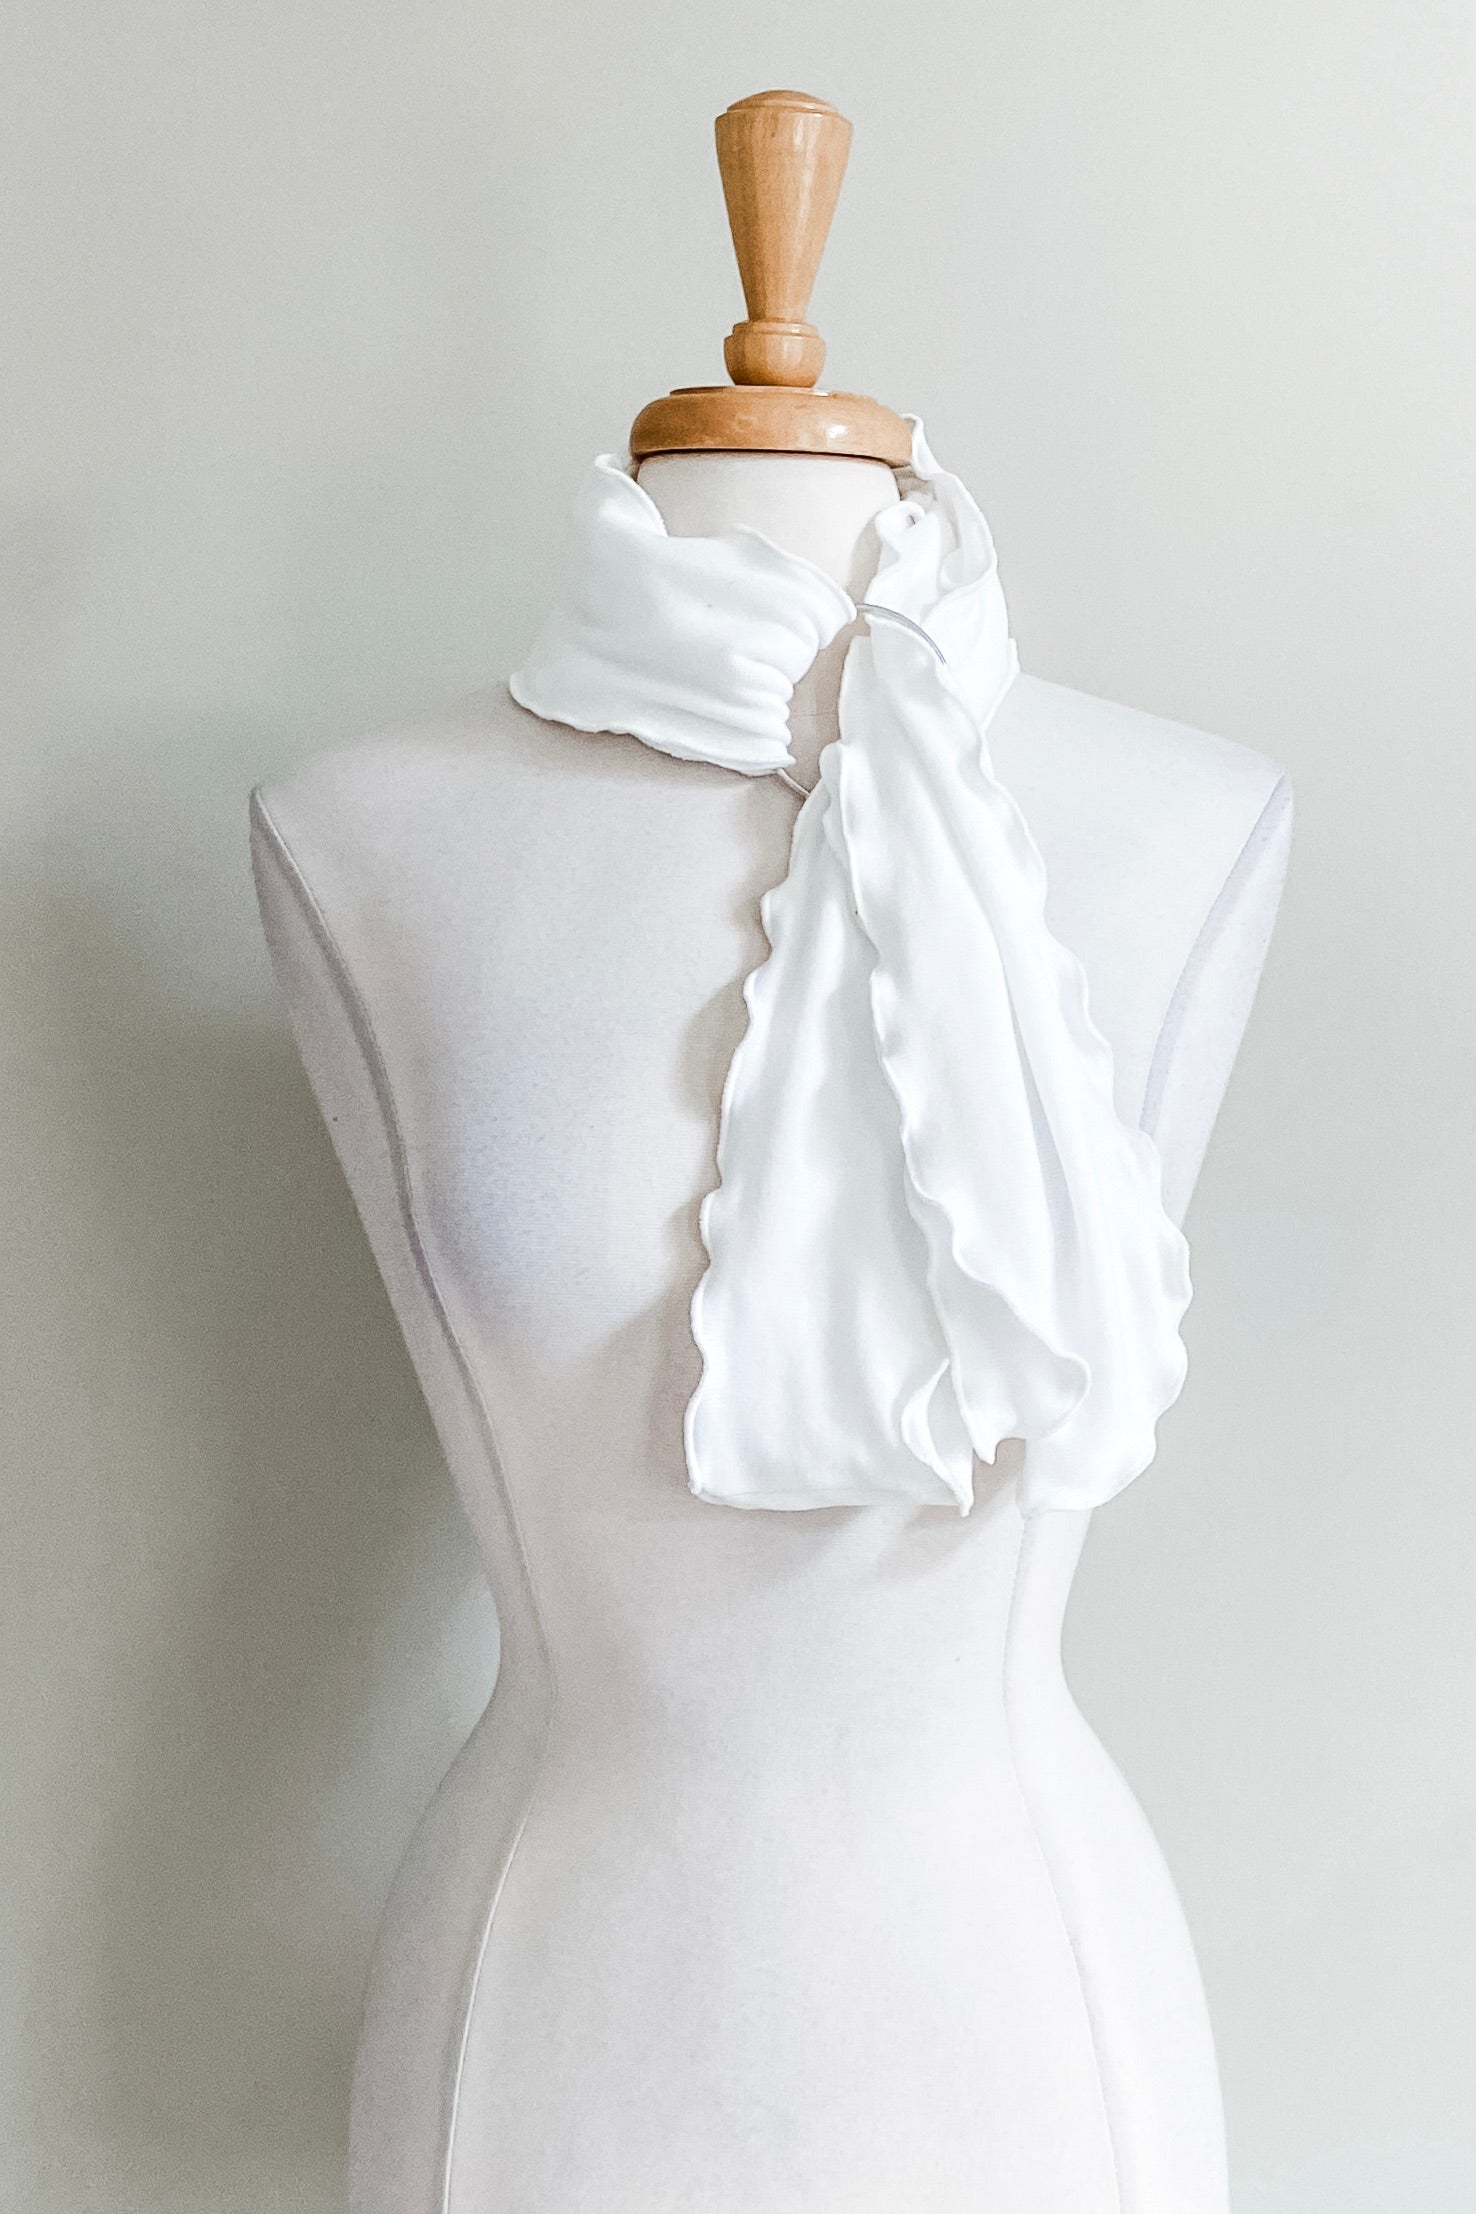 Matching Sash in White color from Diane Kroe